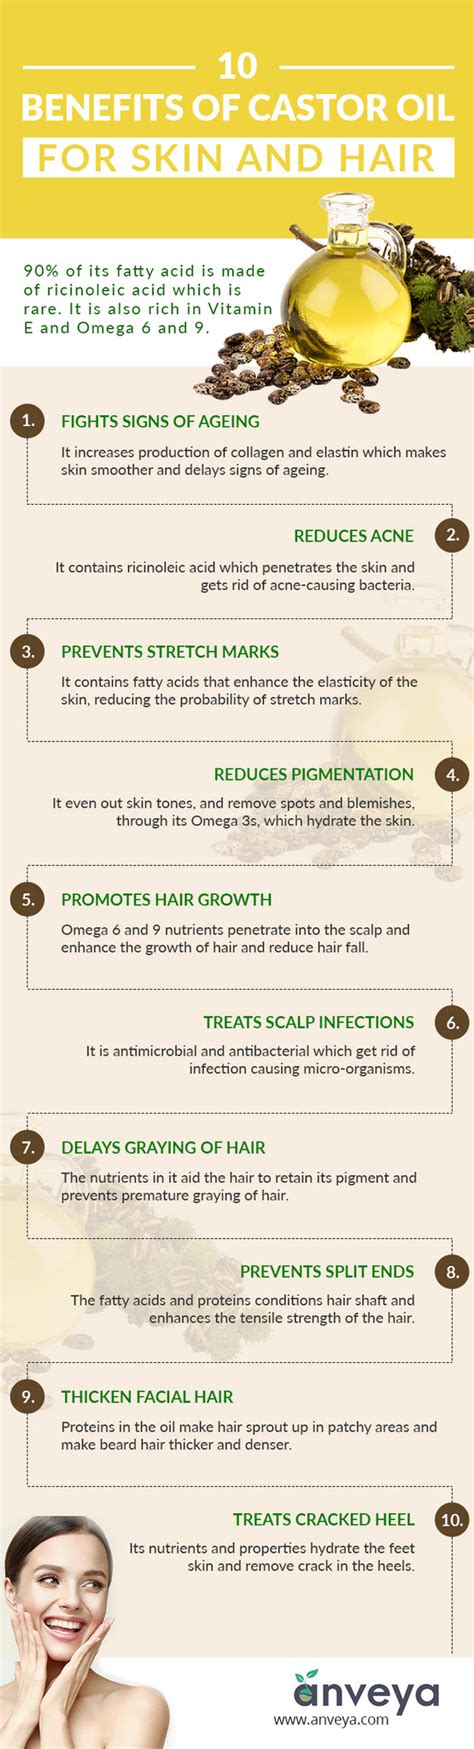 10 Benefits Of Castor Oil For Skin And Hair Infographic